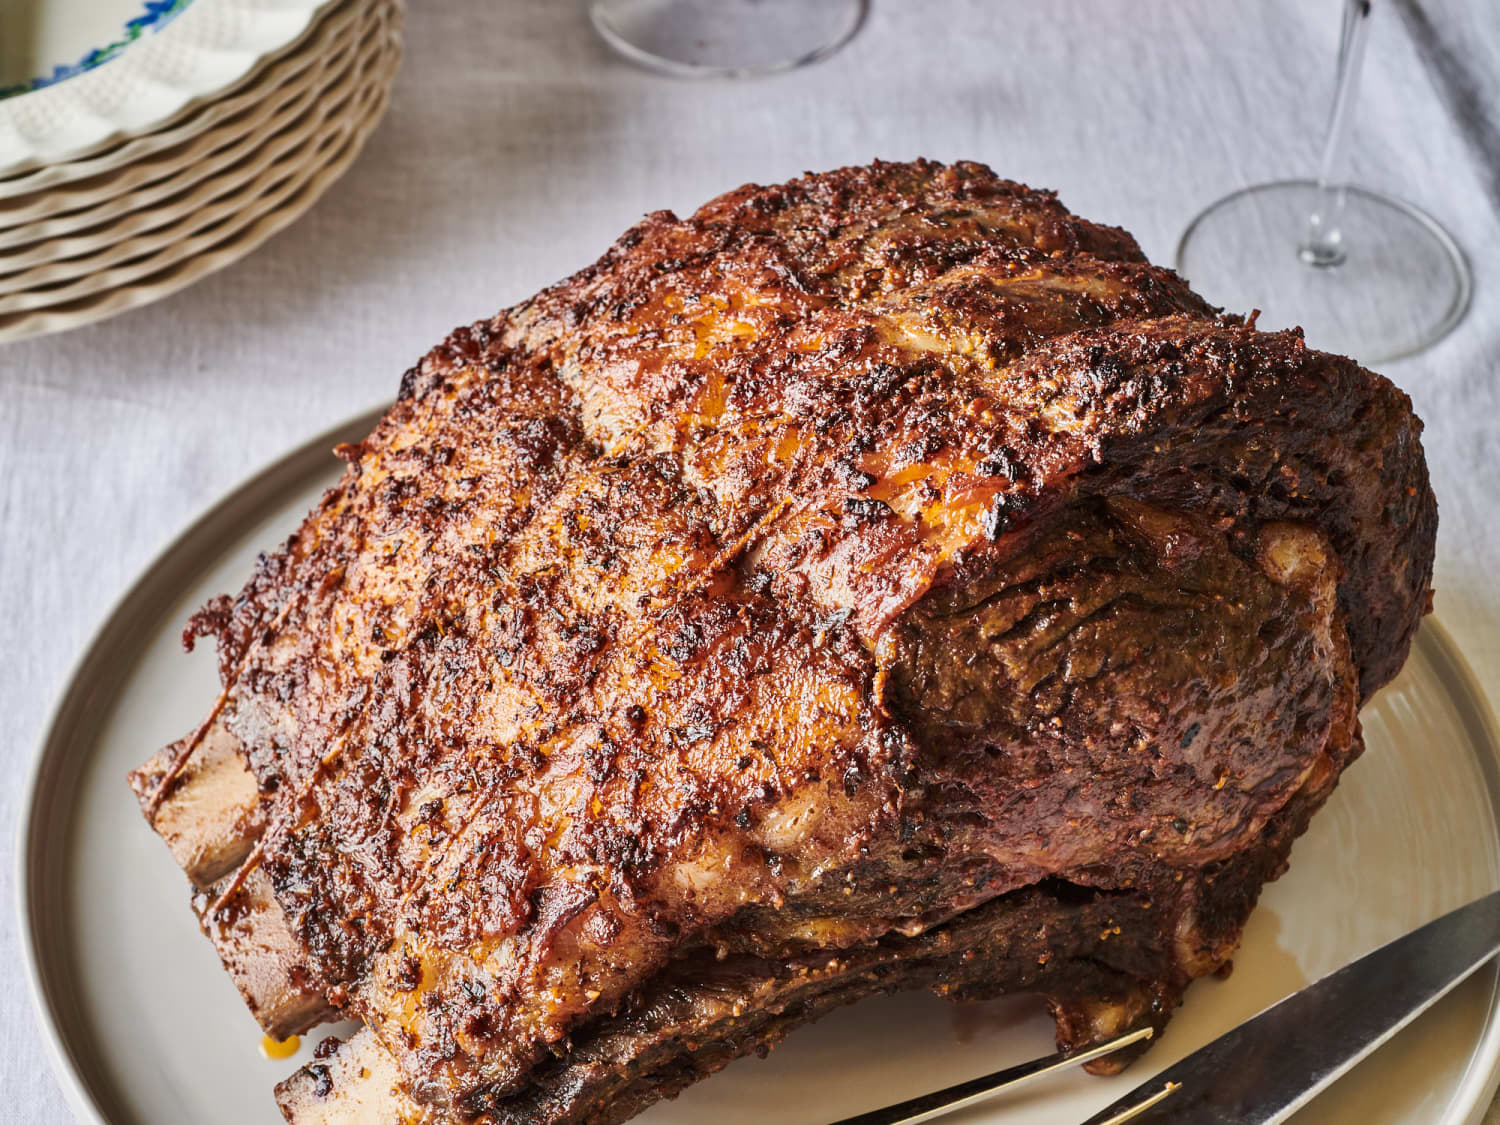 Prime Rib Cooking Temperatures: Tips For Perfect Roasts - Bake It